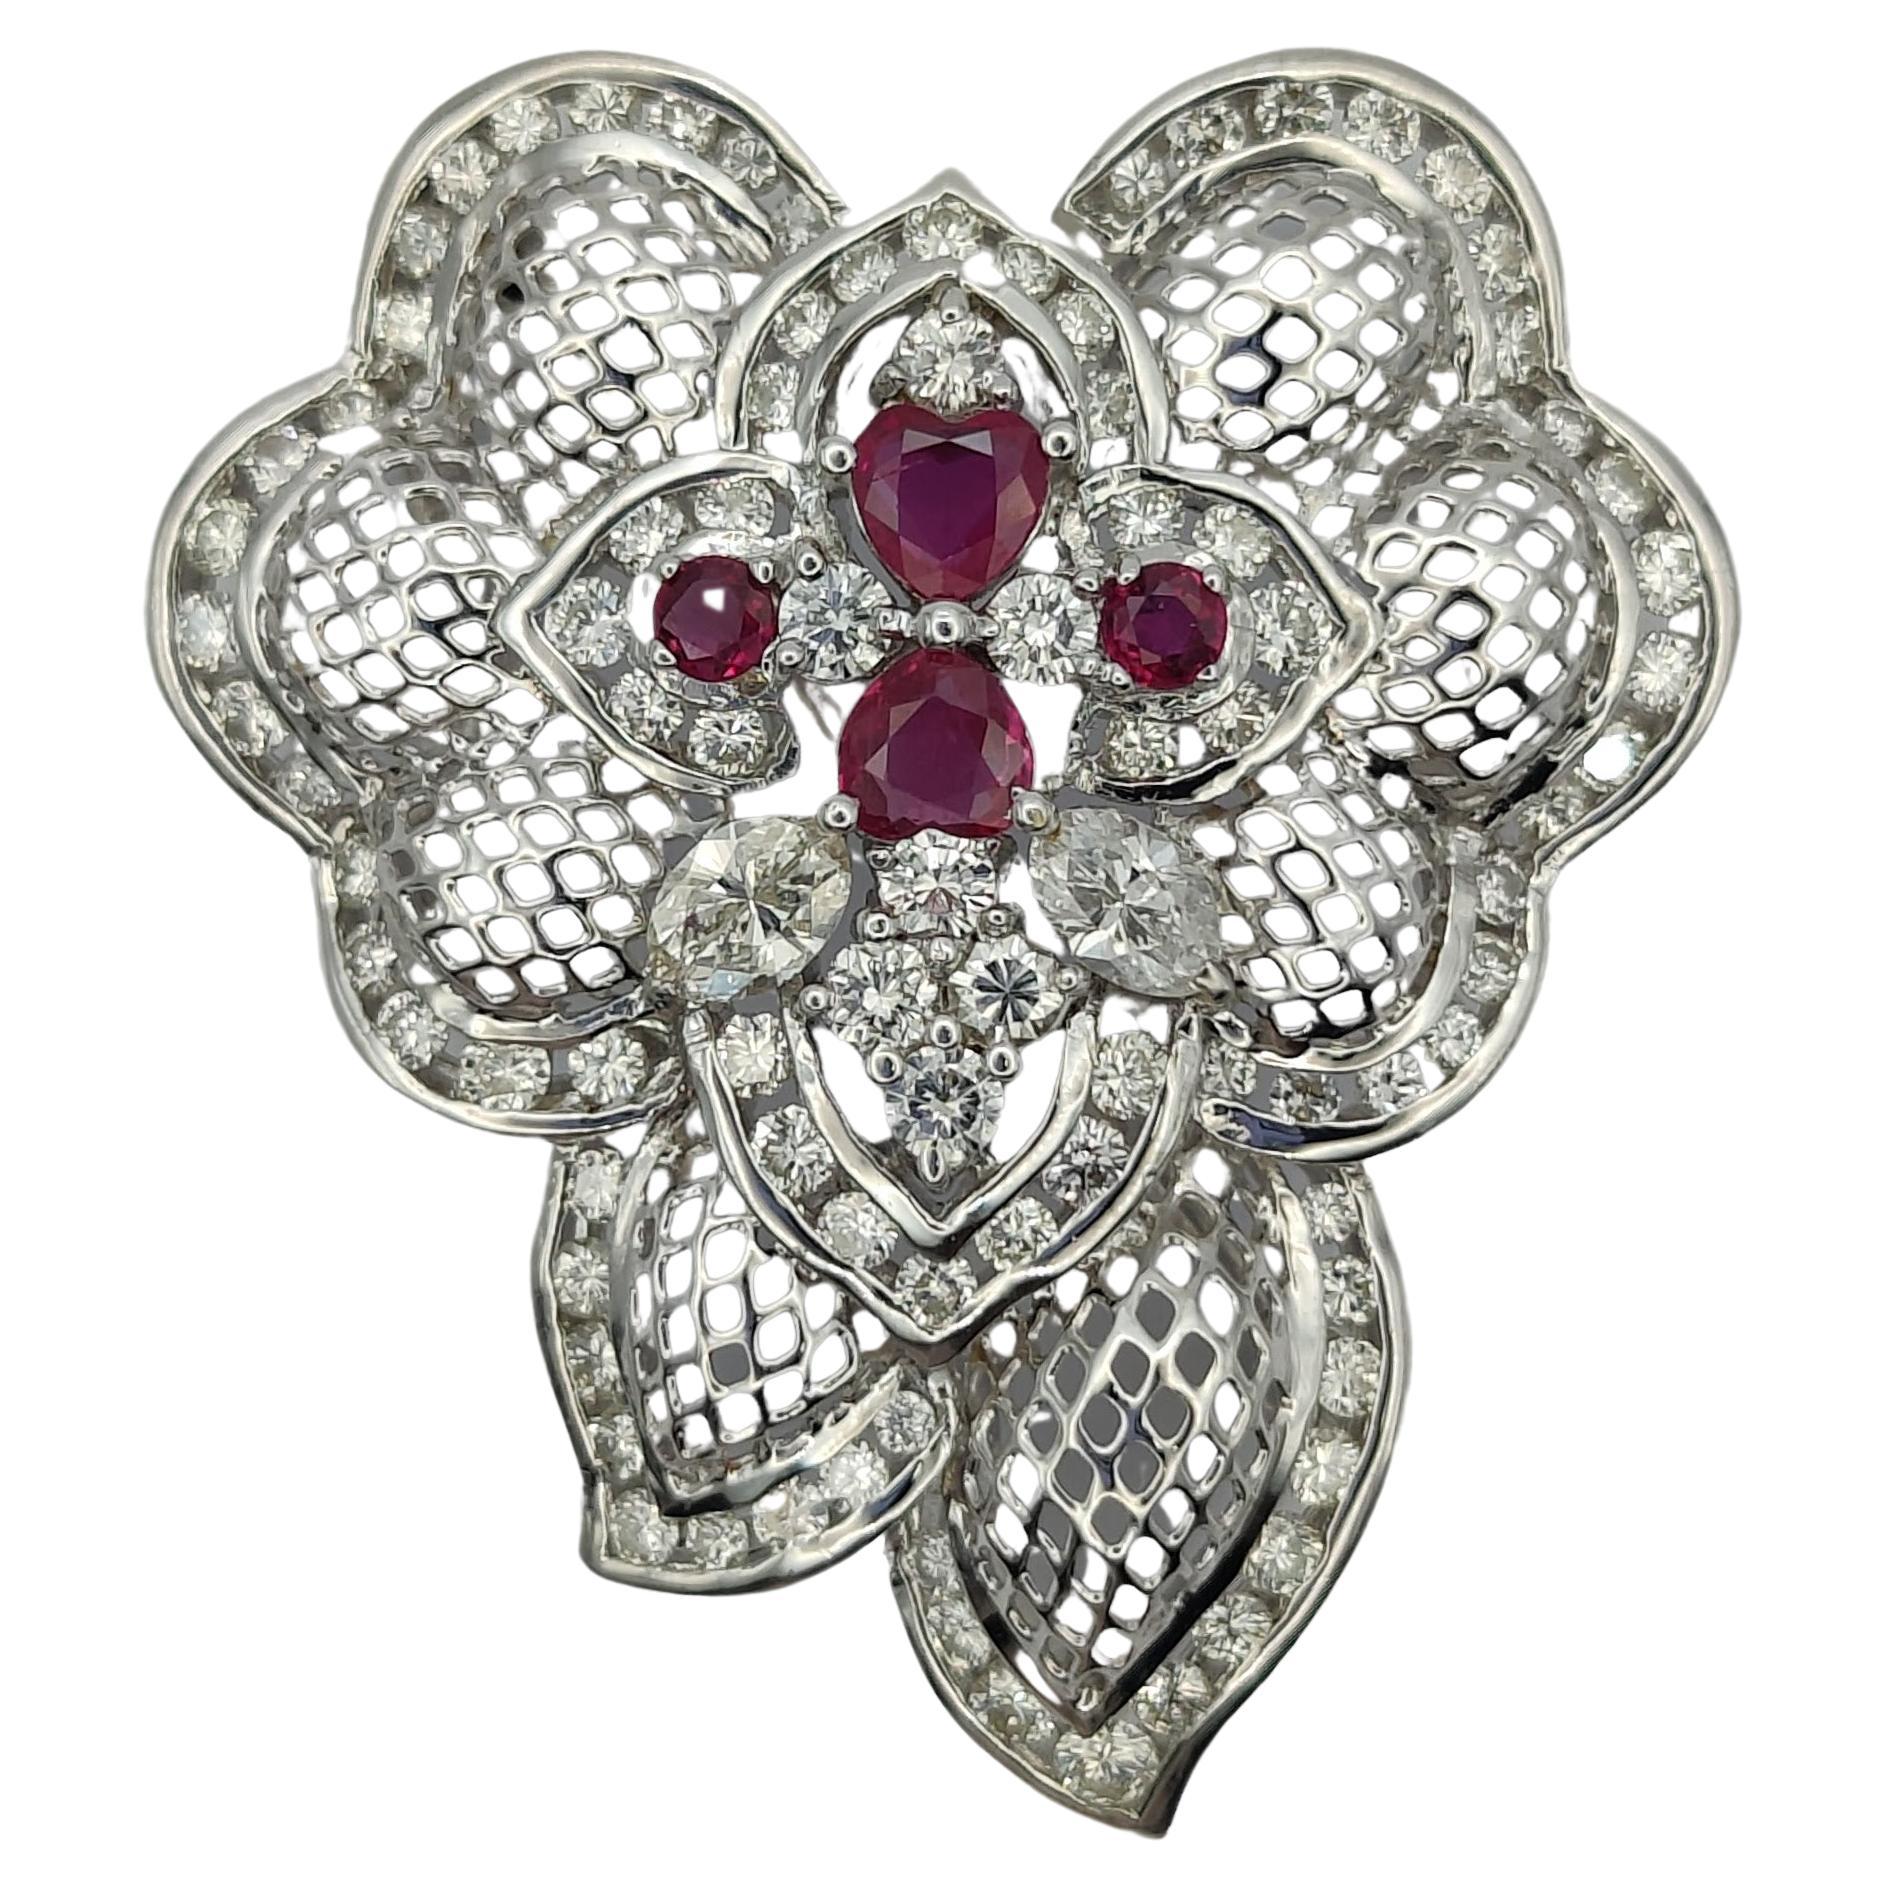 Baroque 0.78 Carat Ruby and 2.7 Carat Diamond Pendant Brooch in 18k White Gold